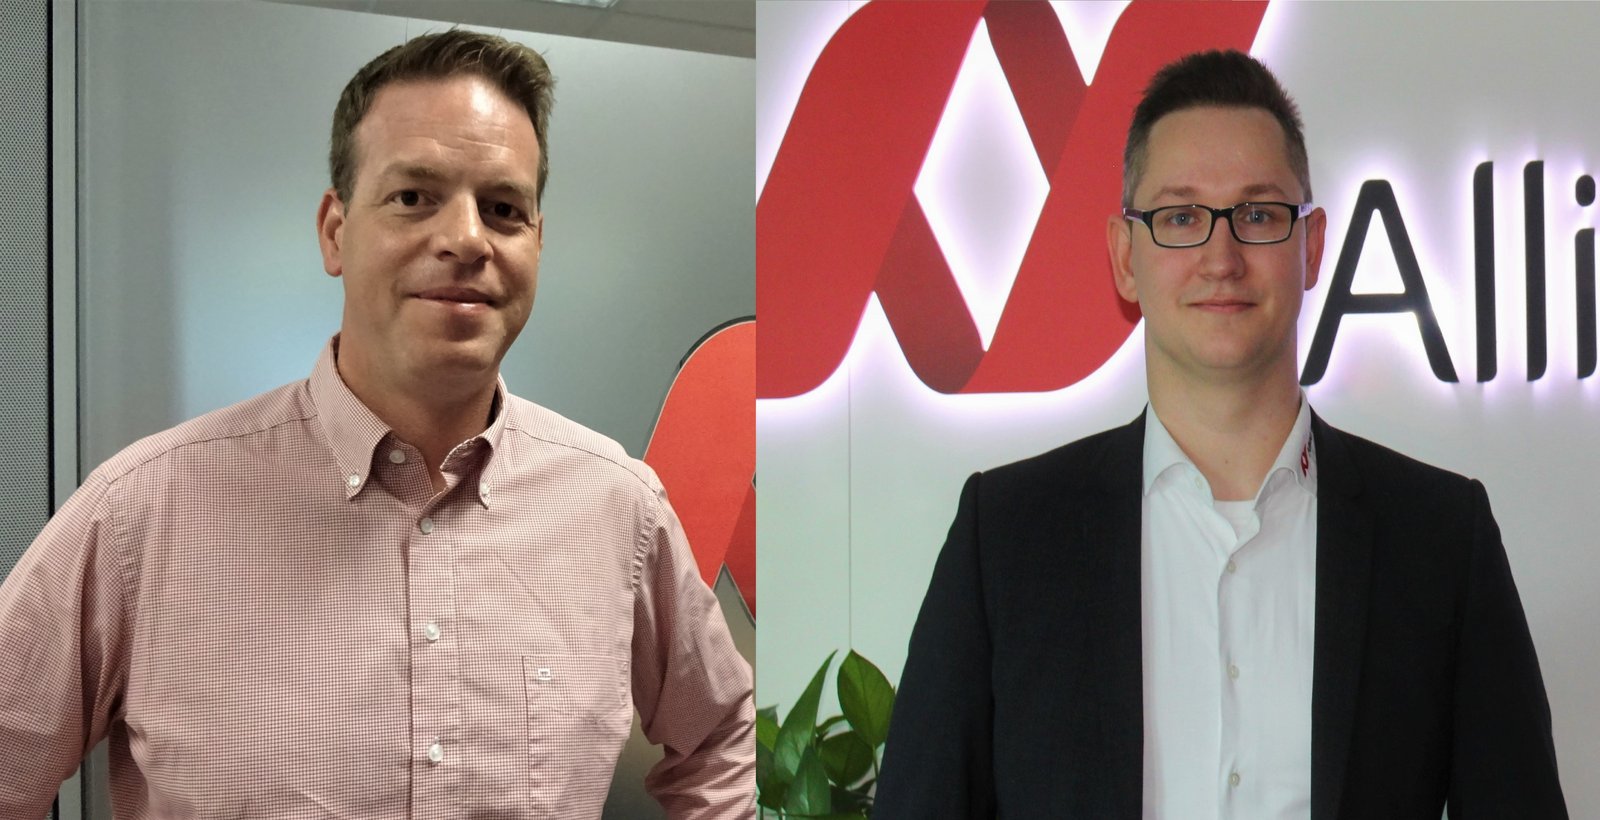 New Sales Manager at Allied Vision: Matthias Werner (left) and Adrian Arndt (right)